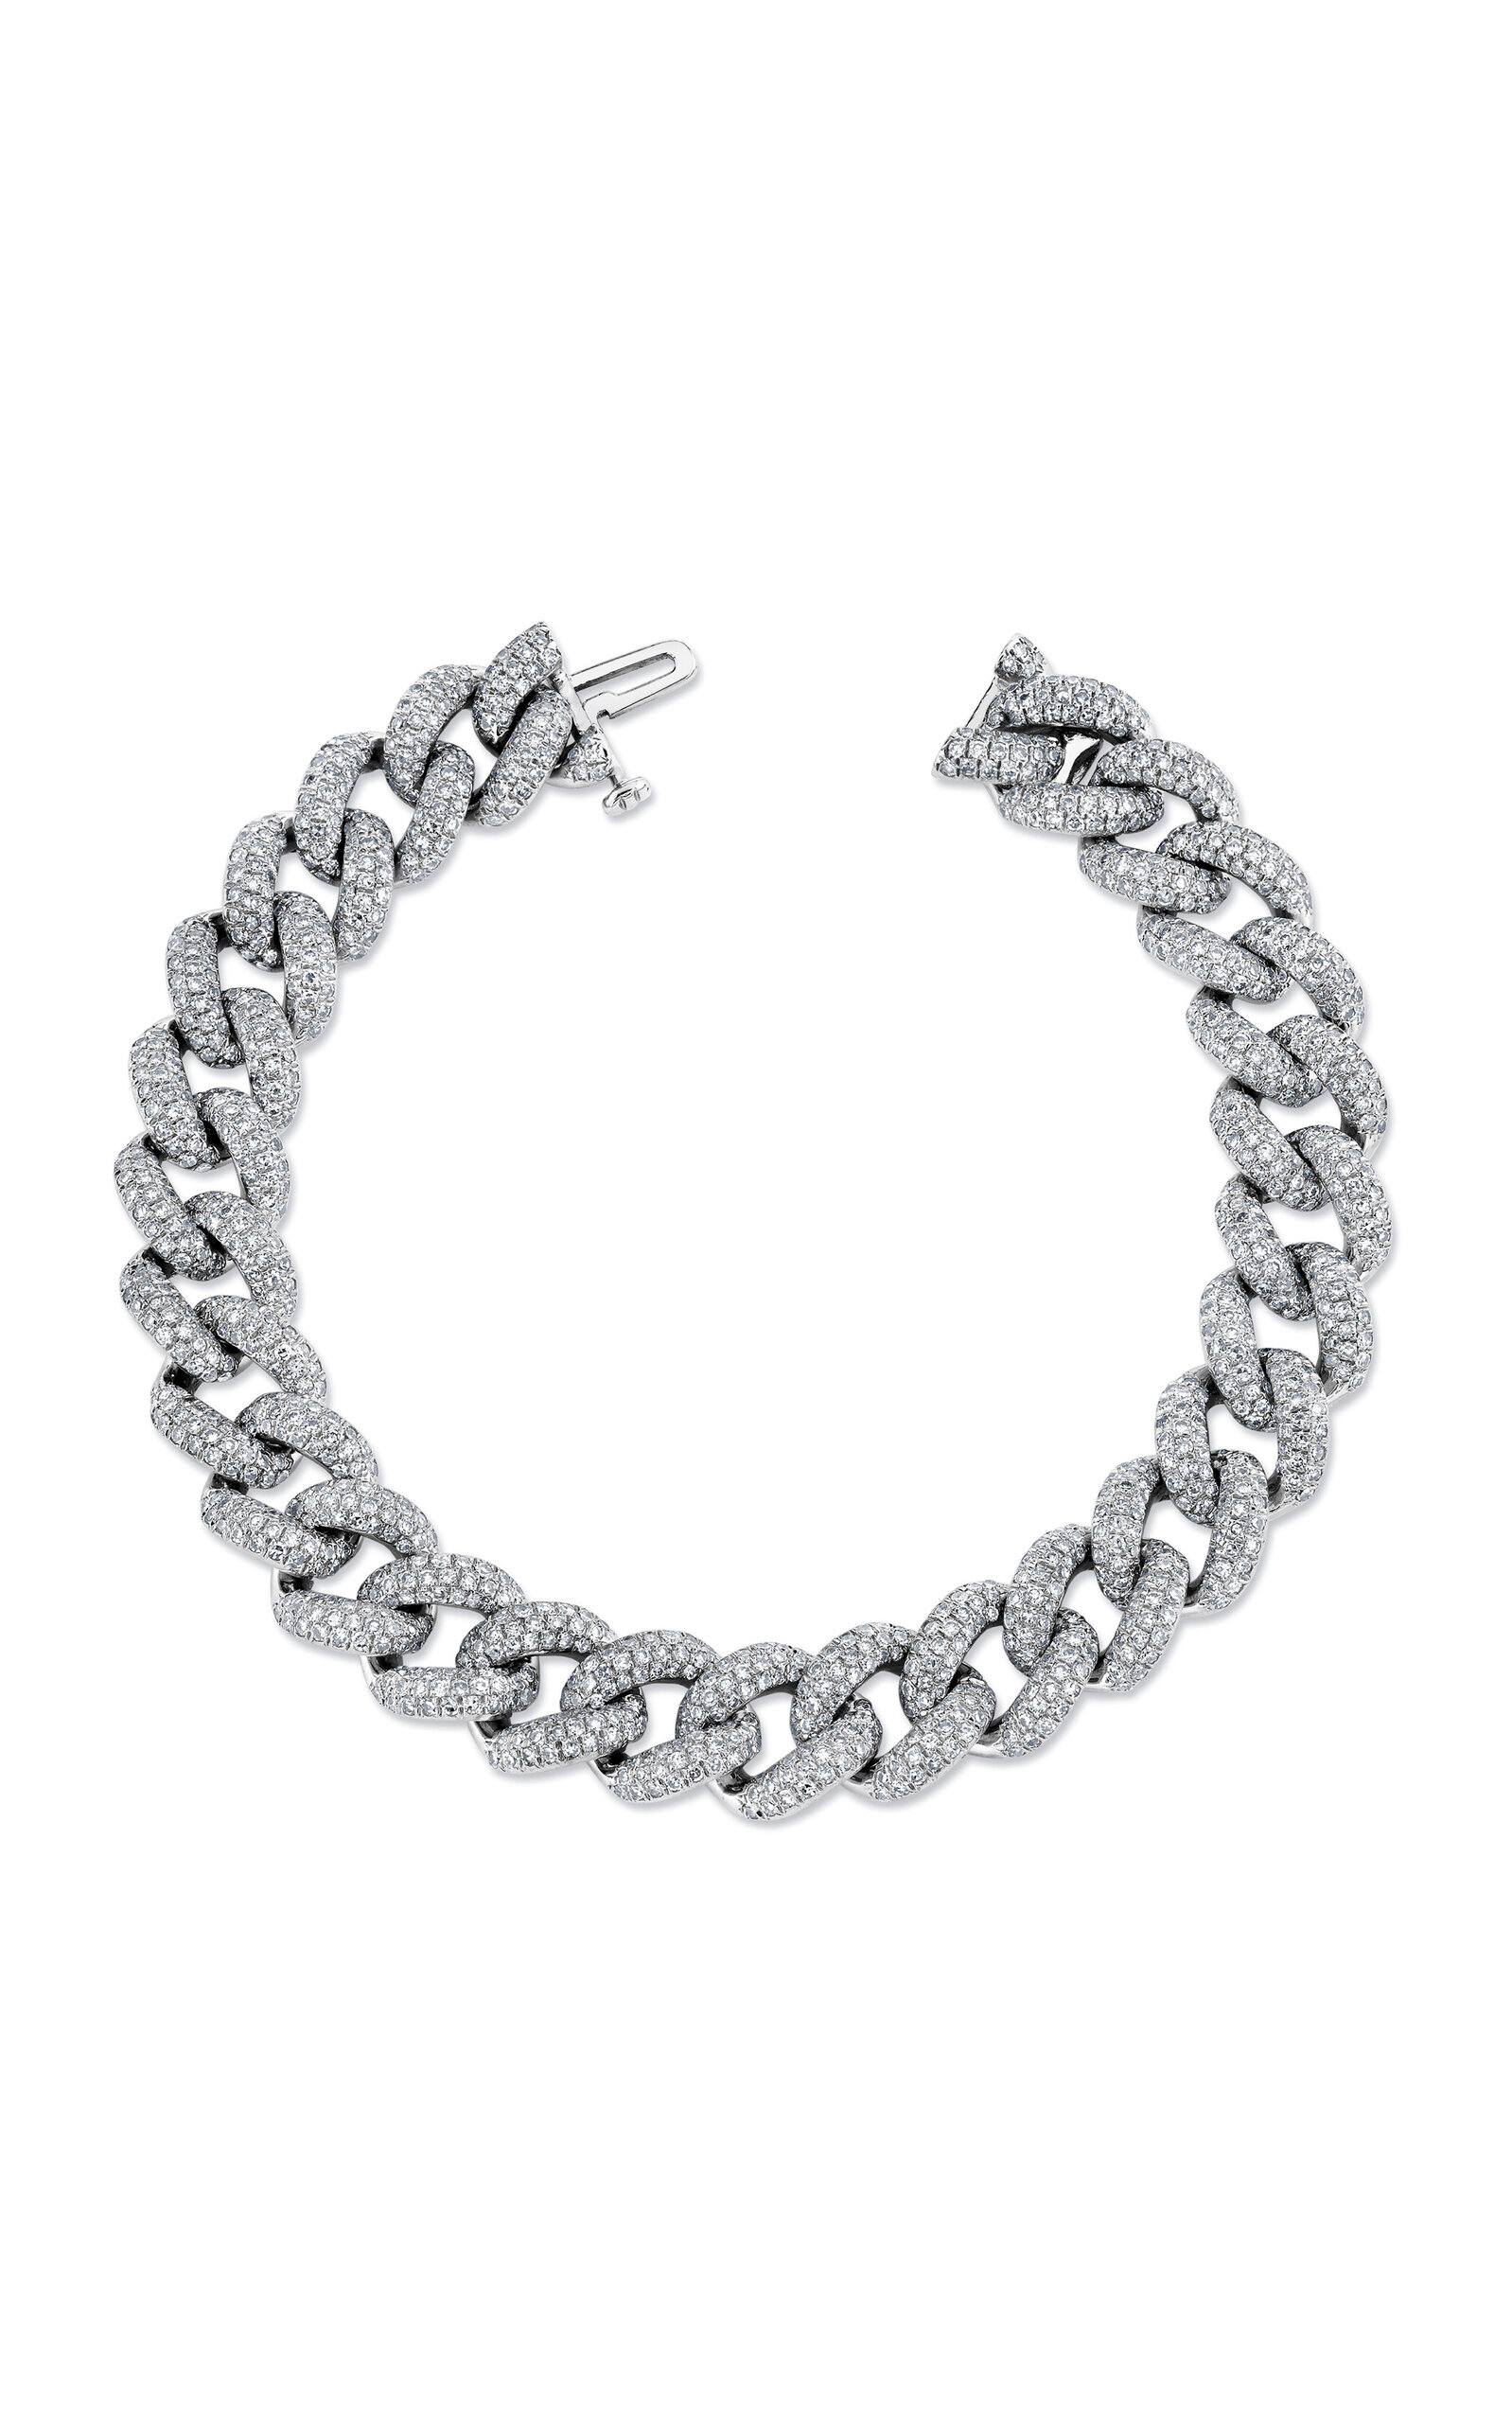 SHAY 18K WHITE GOLD PAVE DIAMOND ESSENTIAL LINK BRACELET IN 10MM